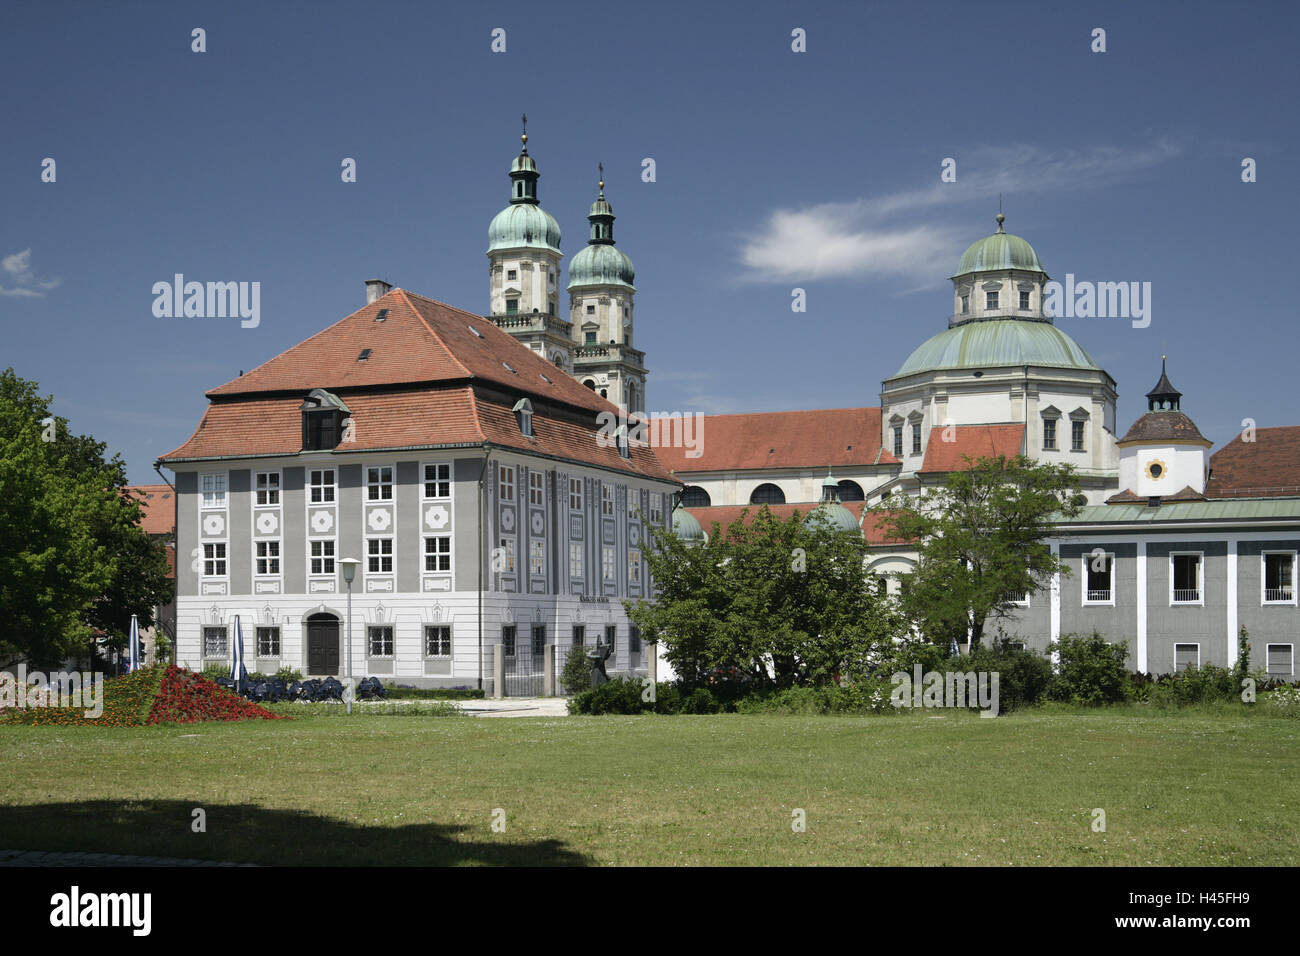 Germany, Bavaria, Kempten, Zumsteinhaus, St. of Lorenz basilica, architecture, Allgäu, church, doubles towers, towers, steeples, dome, church, sacred construction, religion, faith, town house, architectural style, classicism, Romanesque, basilica, deserted, outside, place of interest, Stock Photo